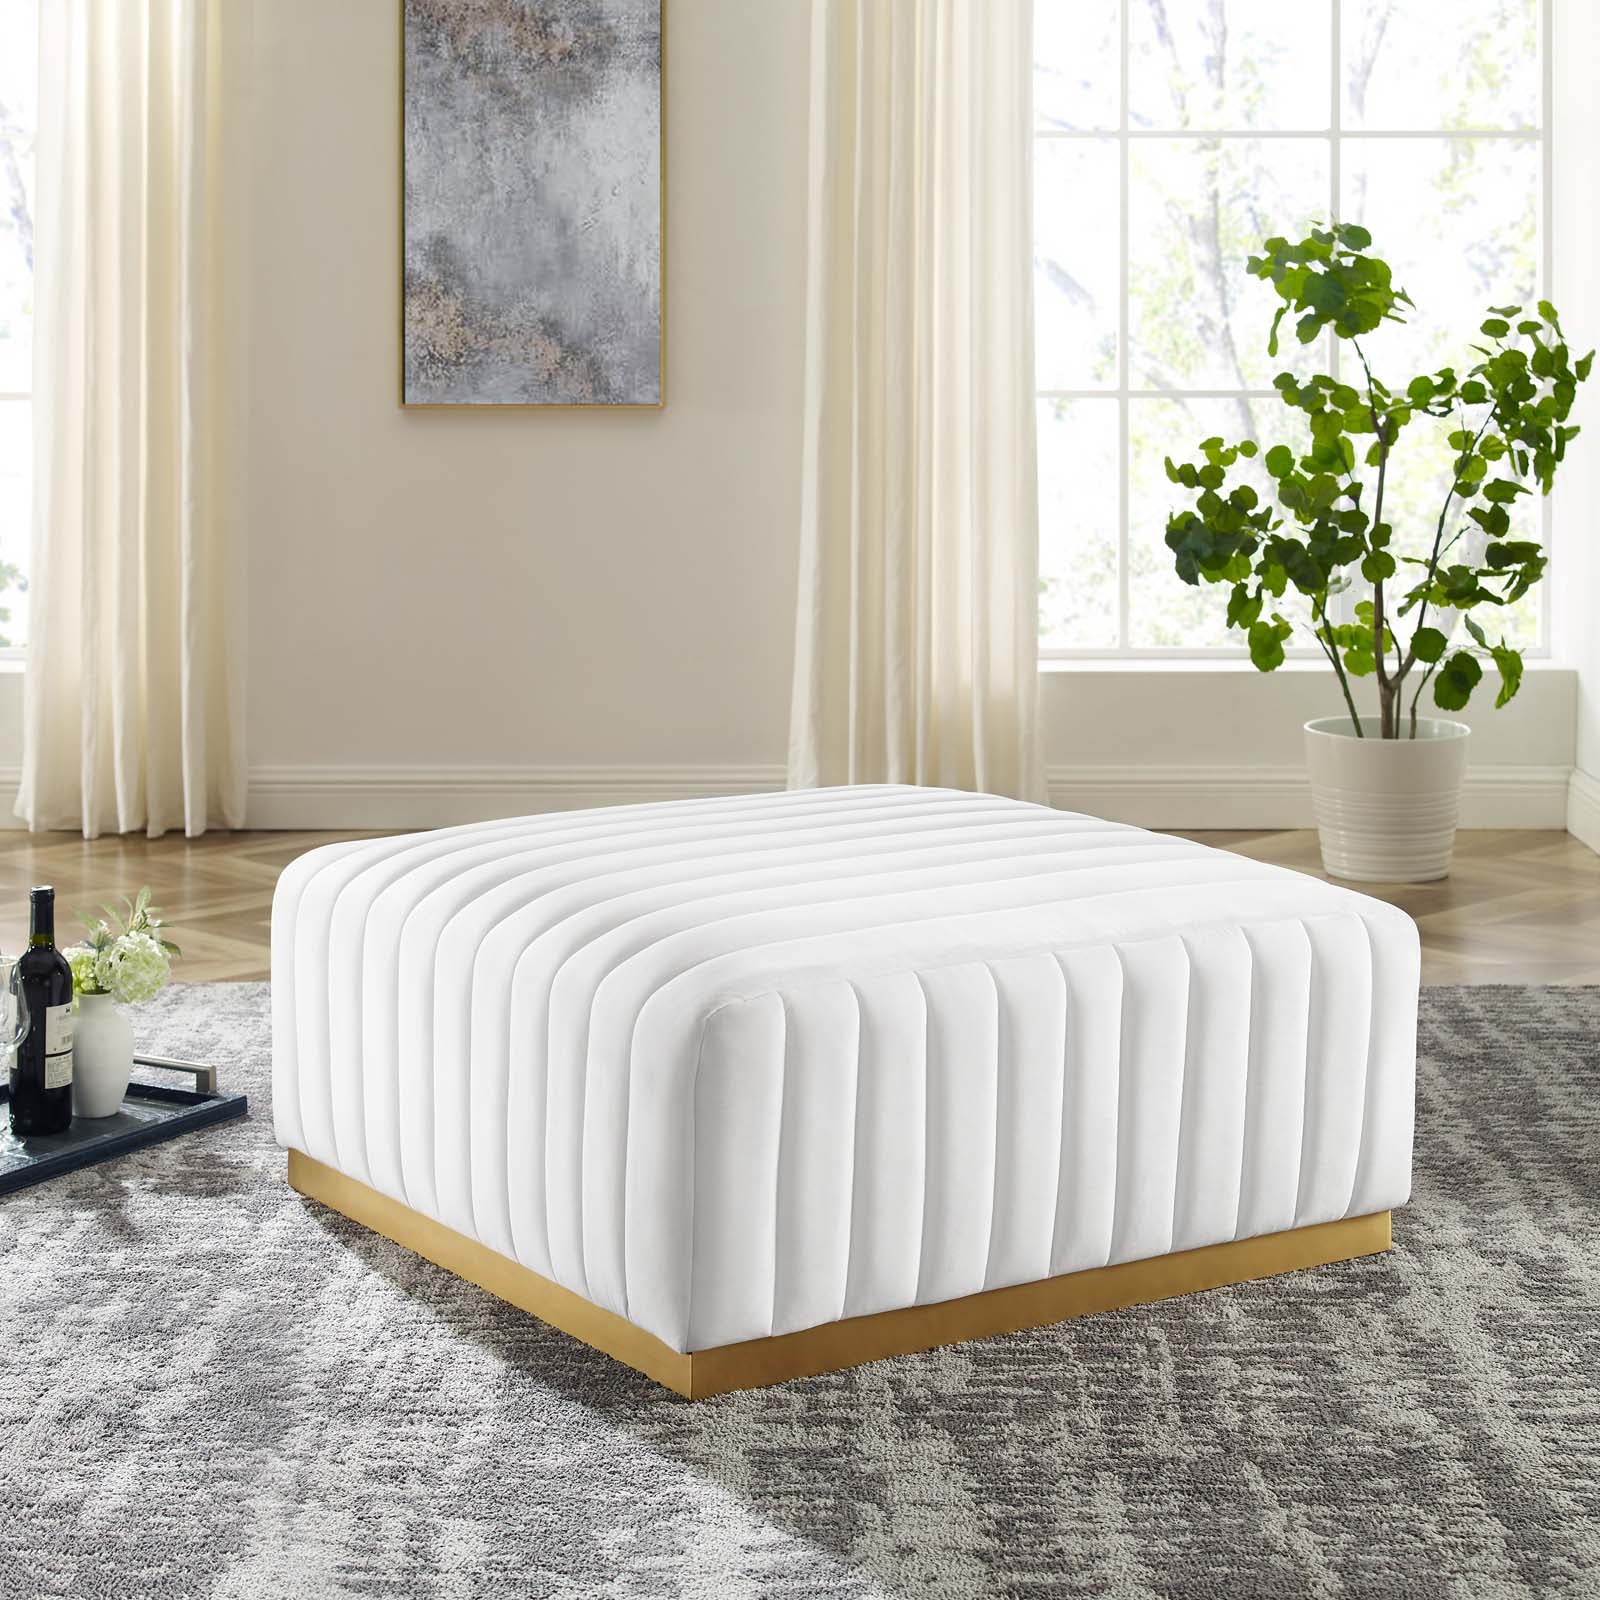 Modway Ottomans & Stools - Conjure Channel Tufted Performance Velvet Ottoman Gold White